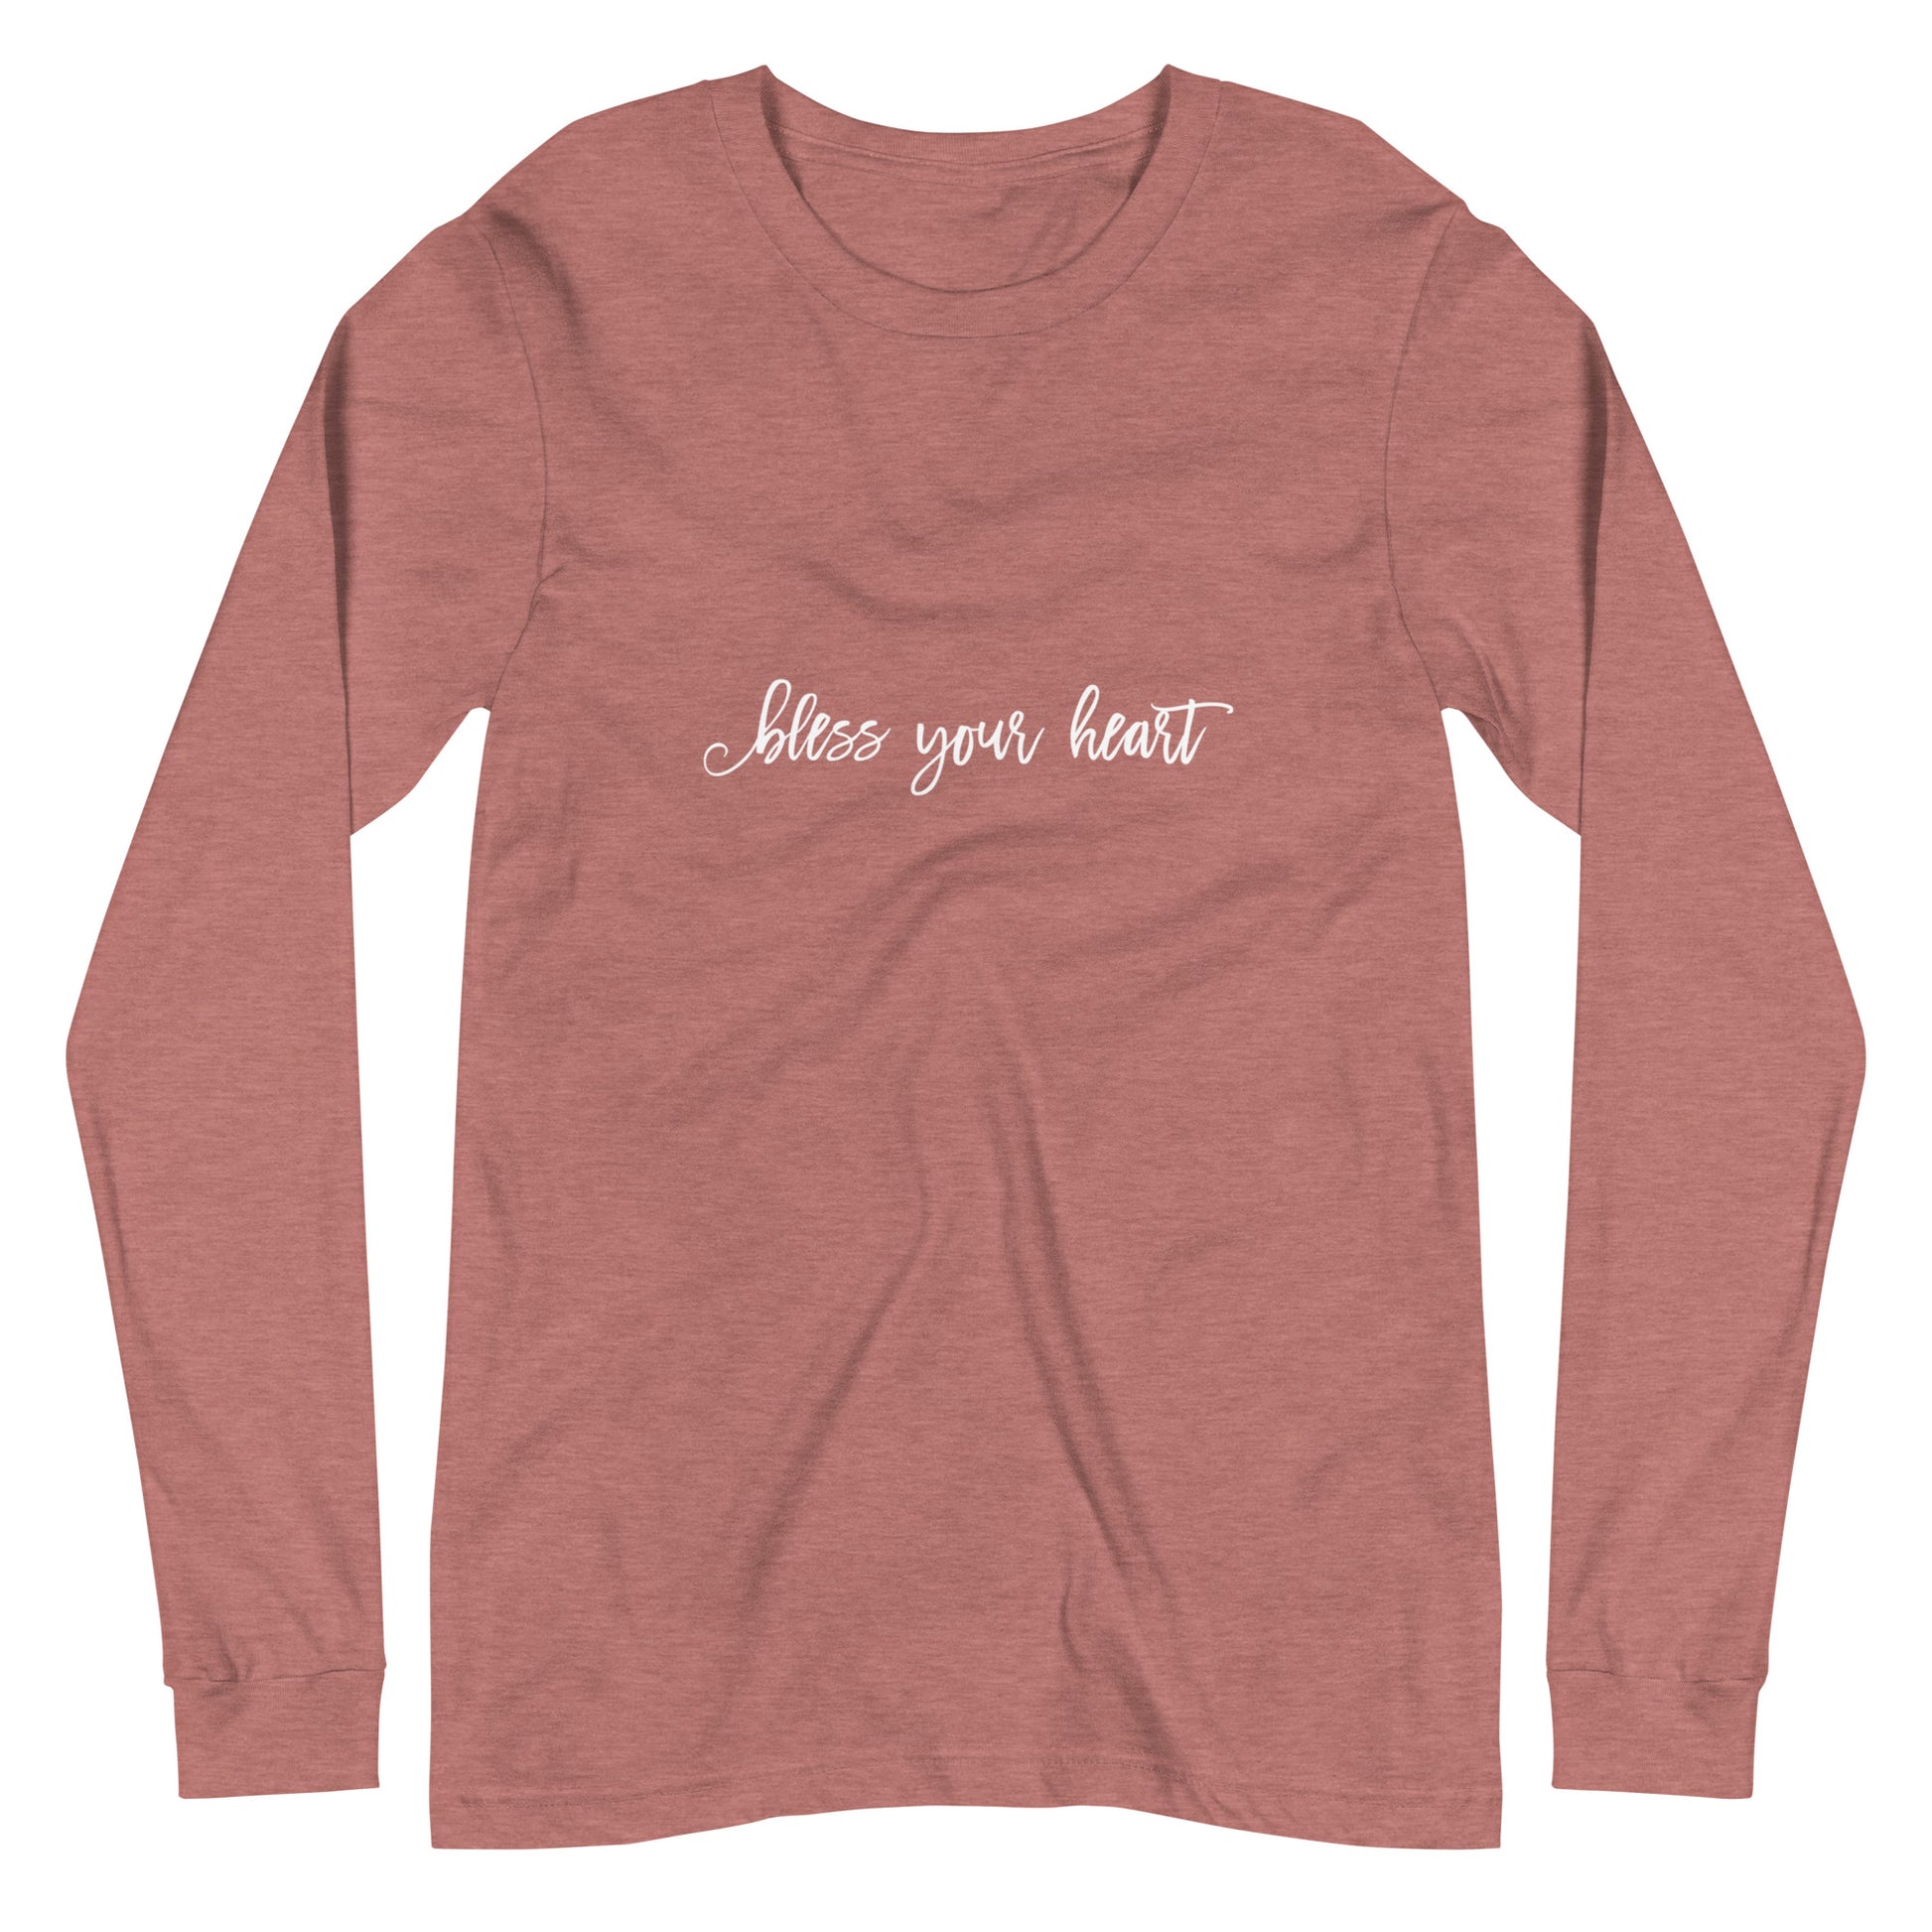 Heather Mauve Dark Grey Heather long-sleeve t-shirt with white graphic in an excessively twee font: "bless your heart"